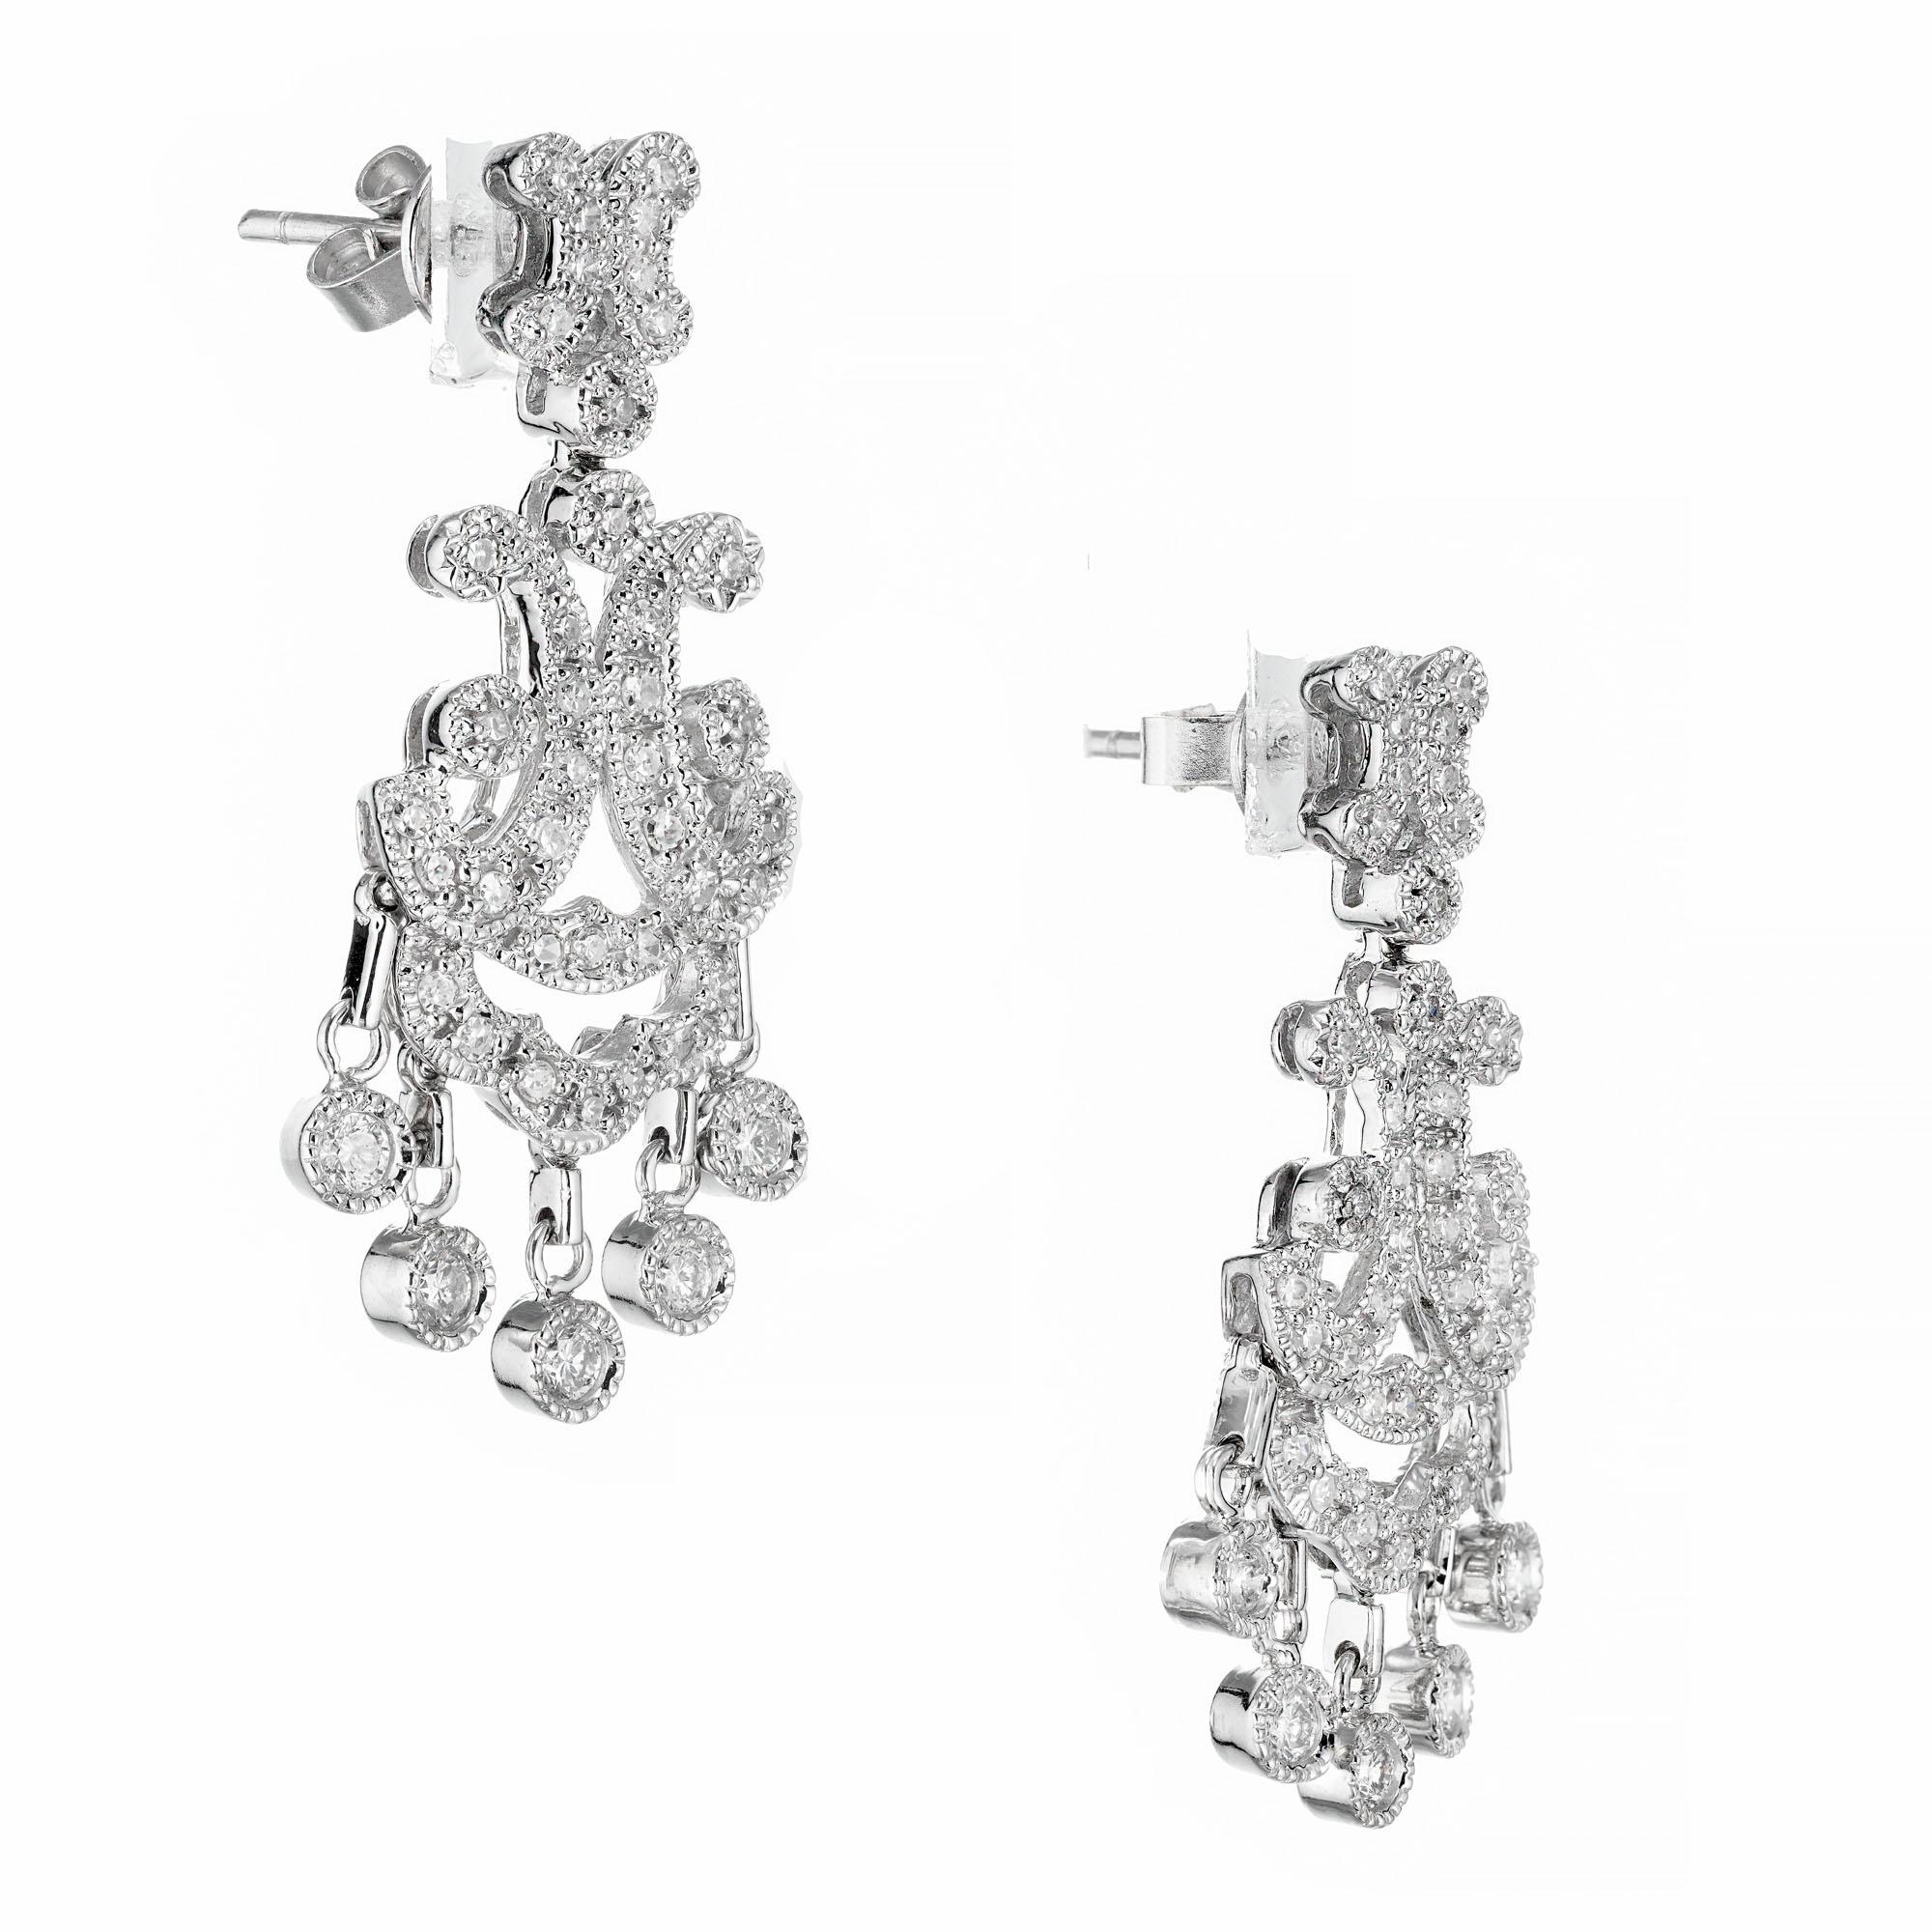 Diamond chandelier dangle earrings. 81 round diamonds set in 14k white gold, with 5 round diamonds that dangle form the base of the earrings. 

86 round diamonds approx. total weight: .79 cts G-H, VS-SI
14k white gold
Length: 1.31 inches or